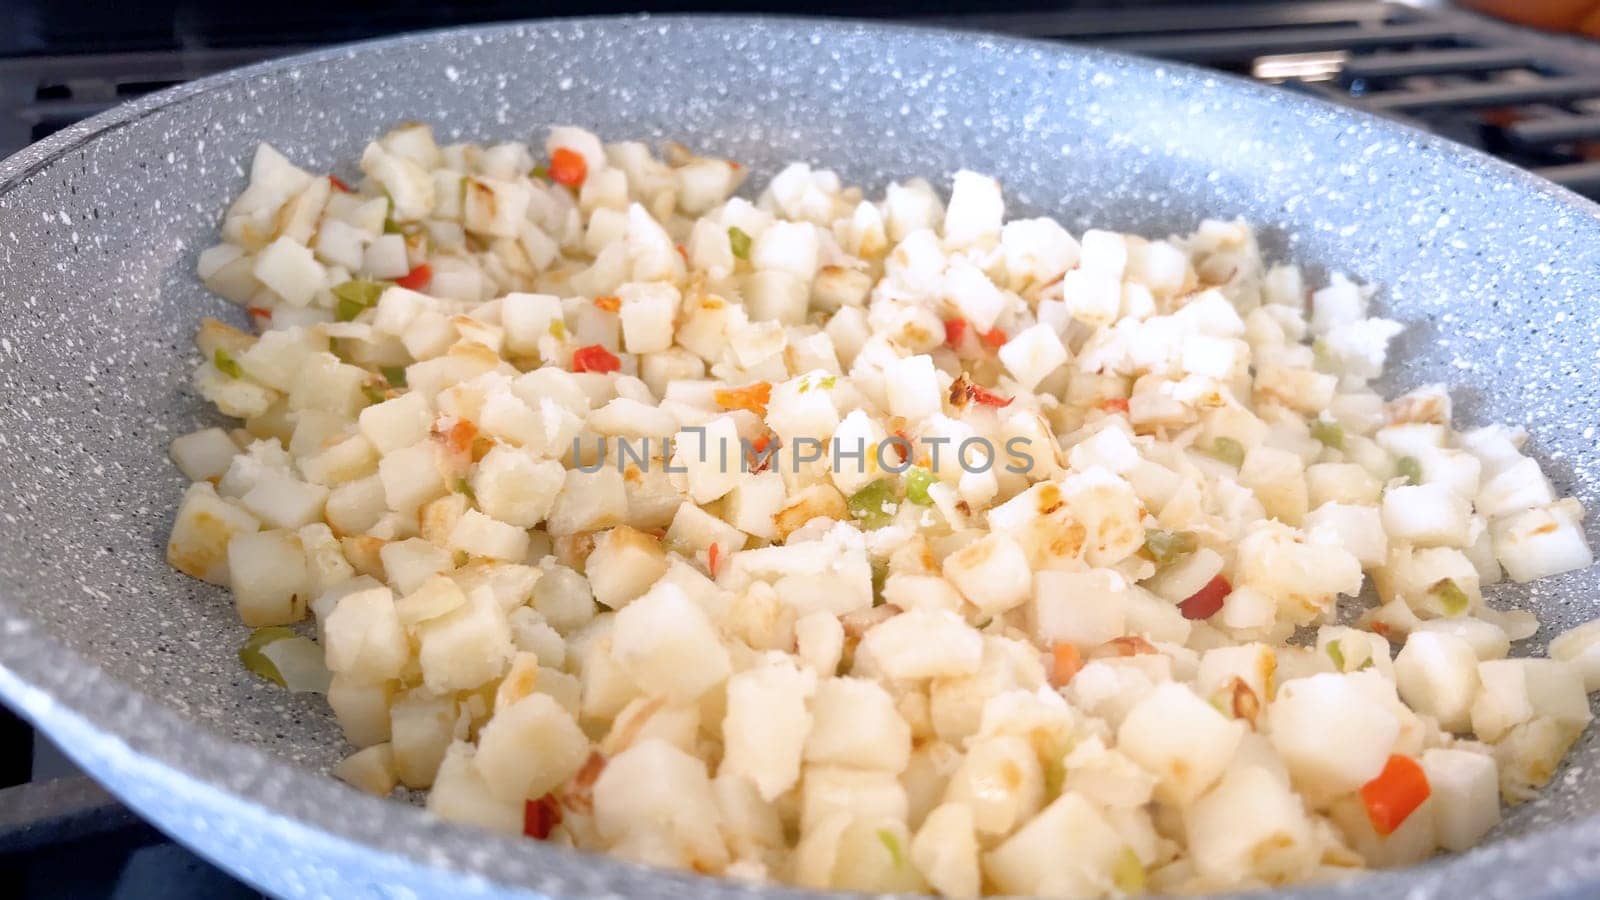 A frying pan on a gas stove sizzles with diced potatoes and colorful bits of red and green peppers, showcasing a delicious and simple home-cooked side dish in the making.